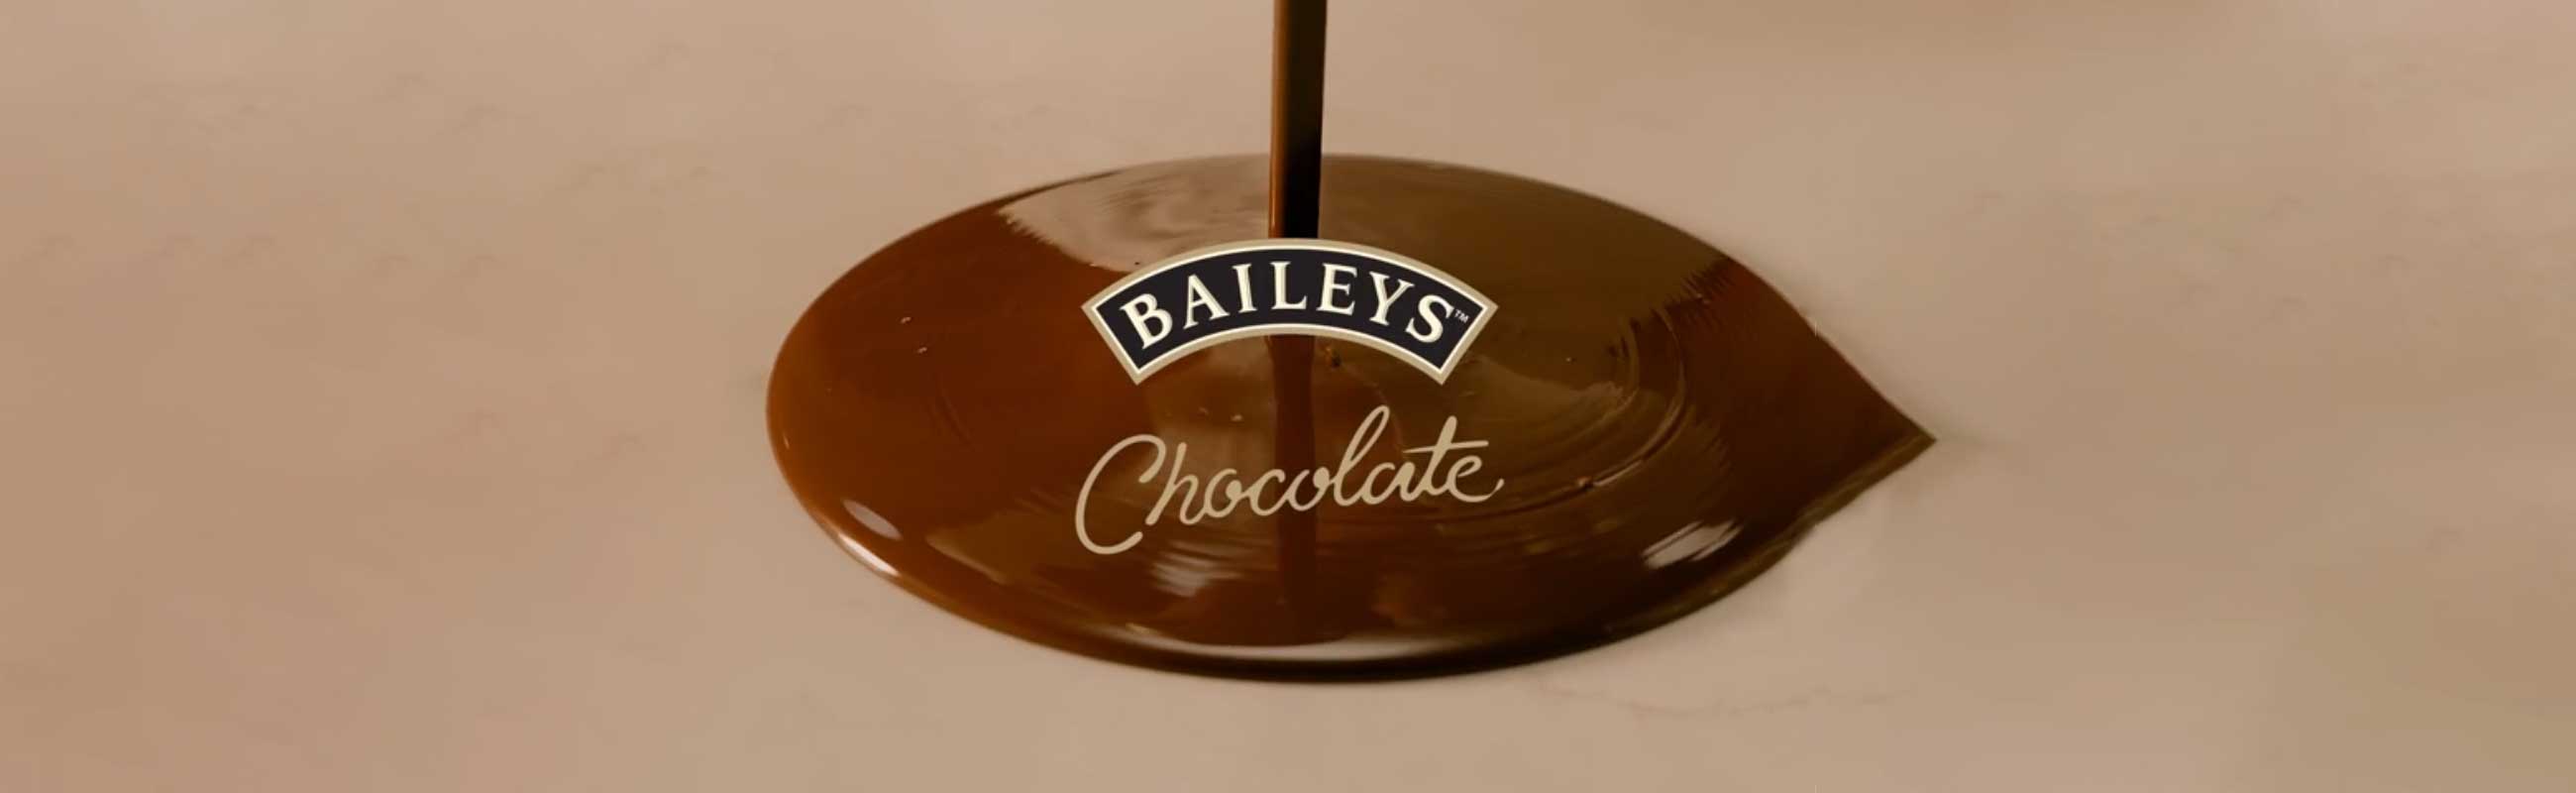 Make Room For Dessert and Experience Chocolate Like Never Before with the Introduction of Baileys Chocolate Liqueur